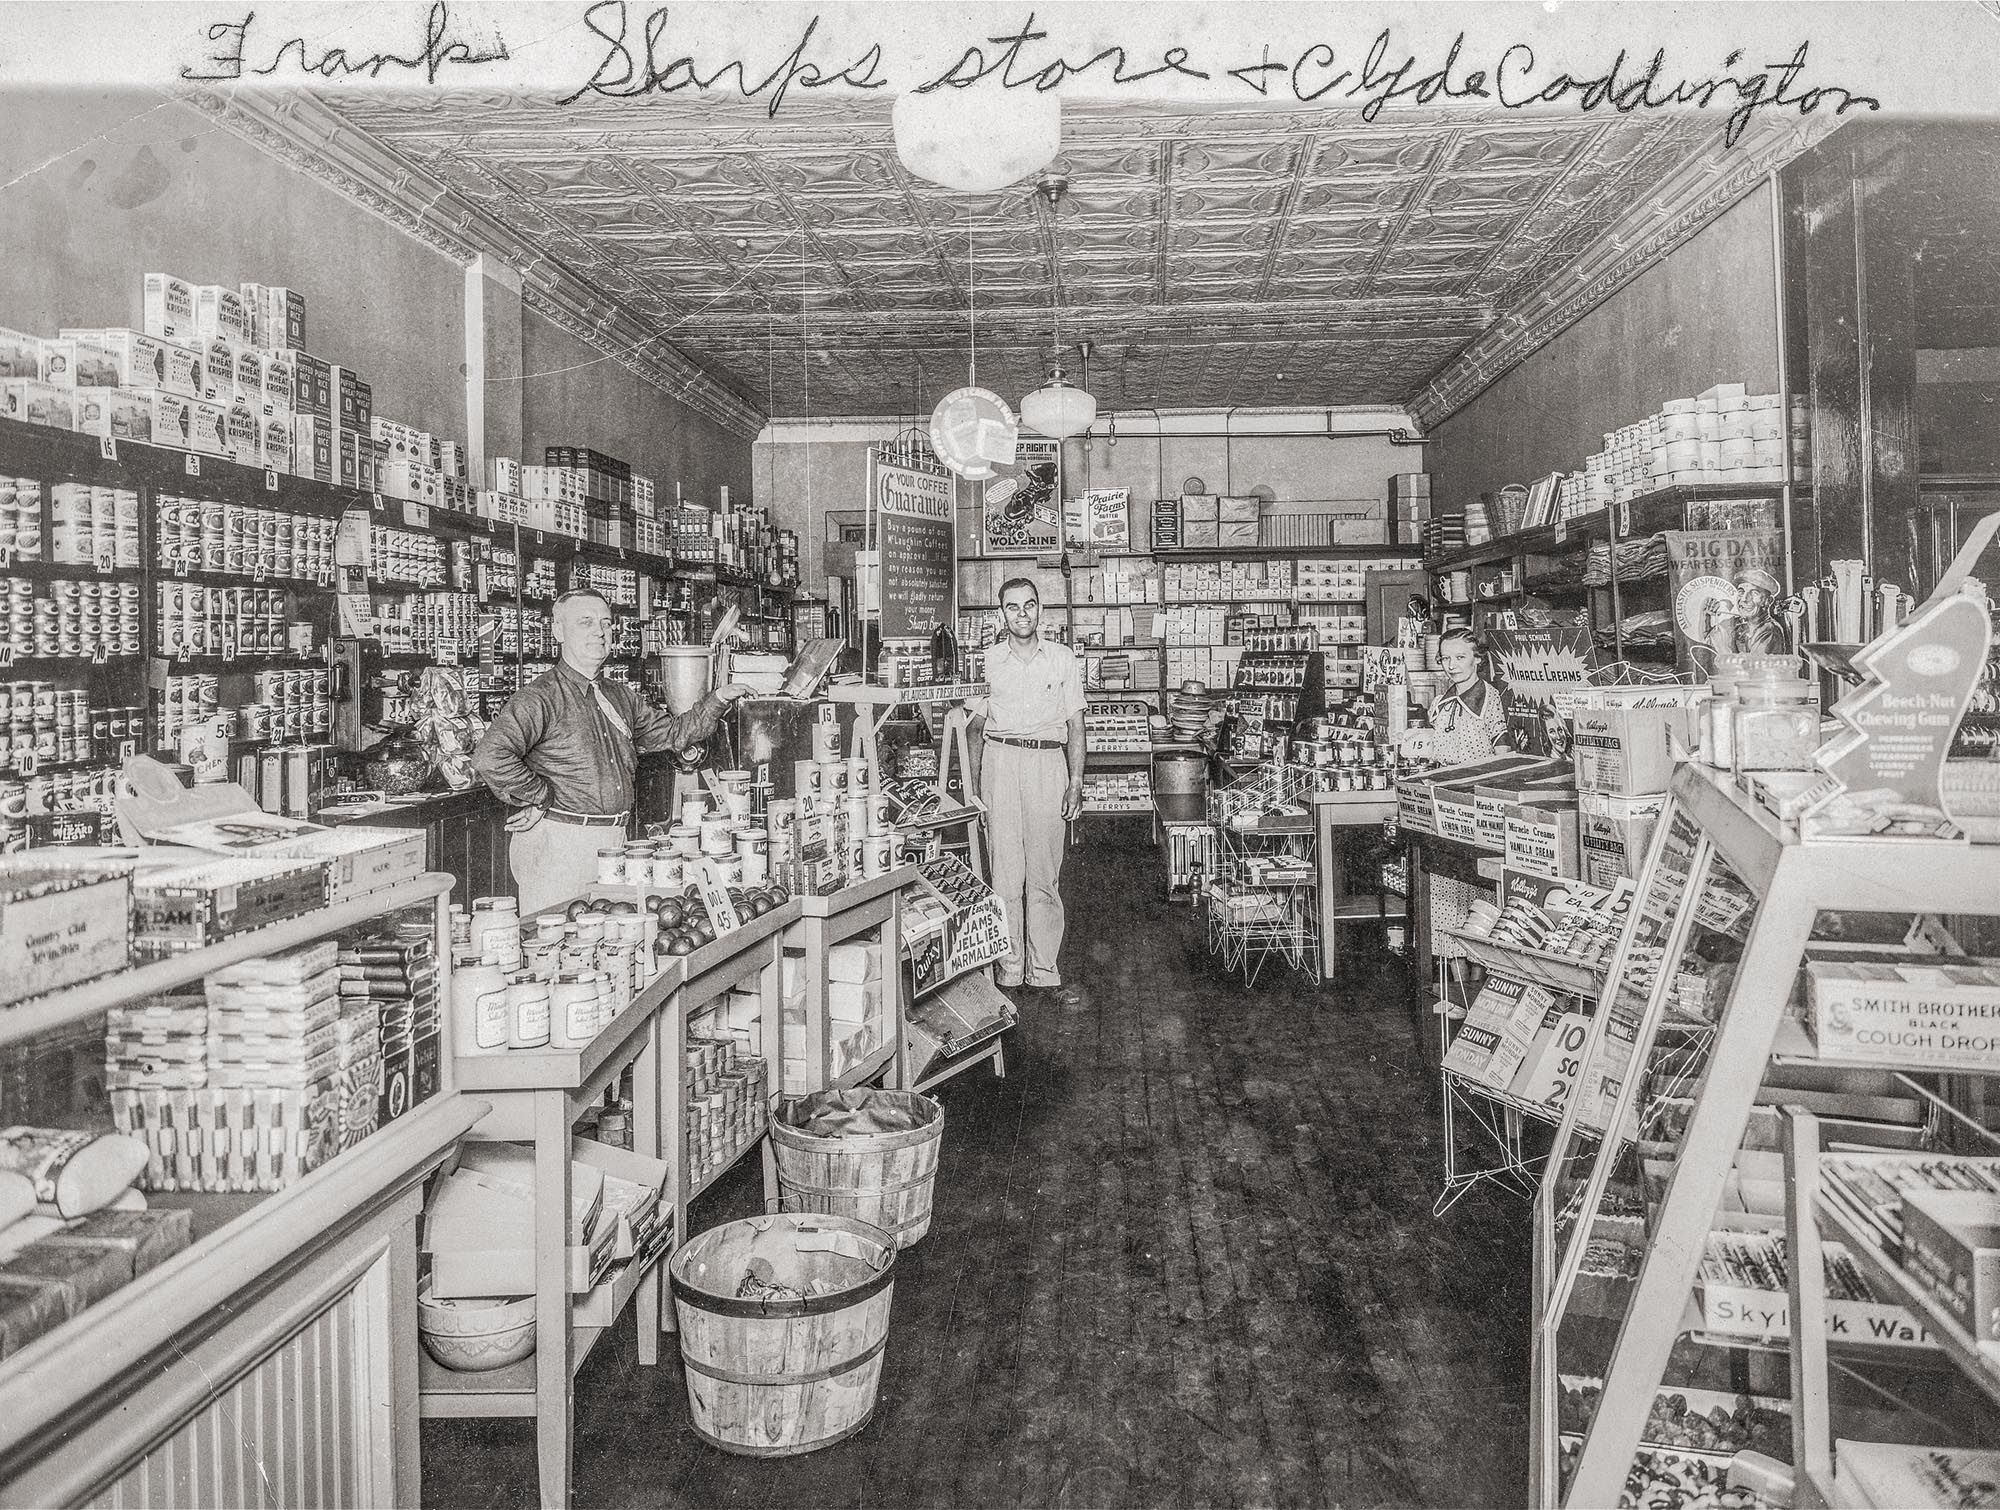 Shorpy Historical Picture Archive :: Frank Sharp's Store: 1936 high ...